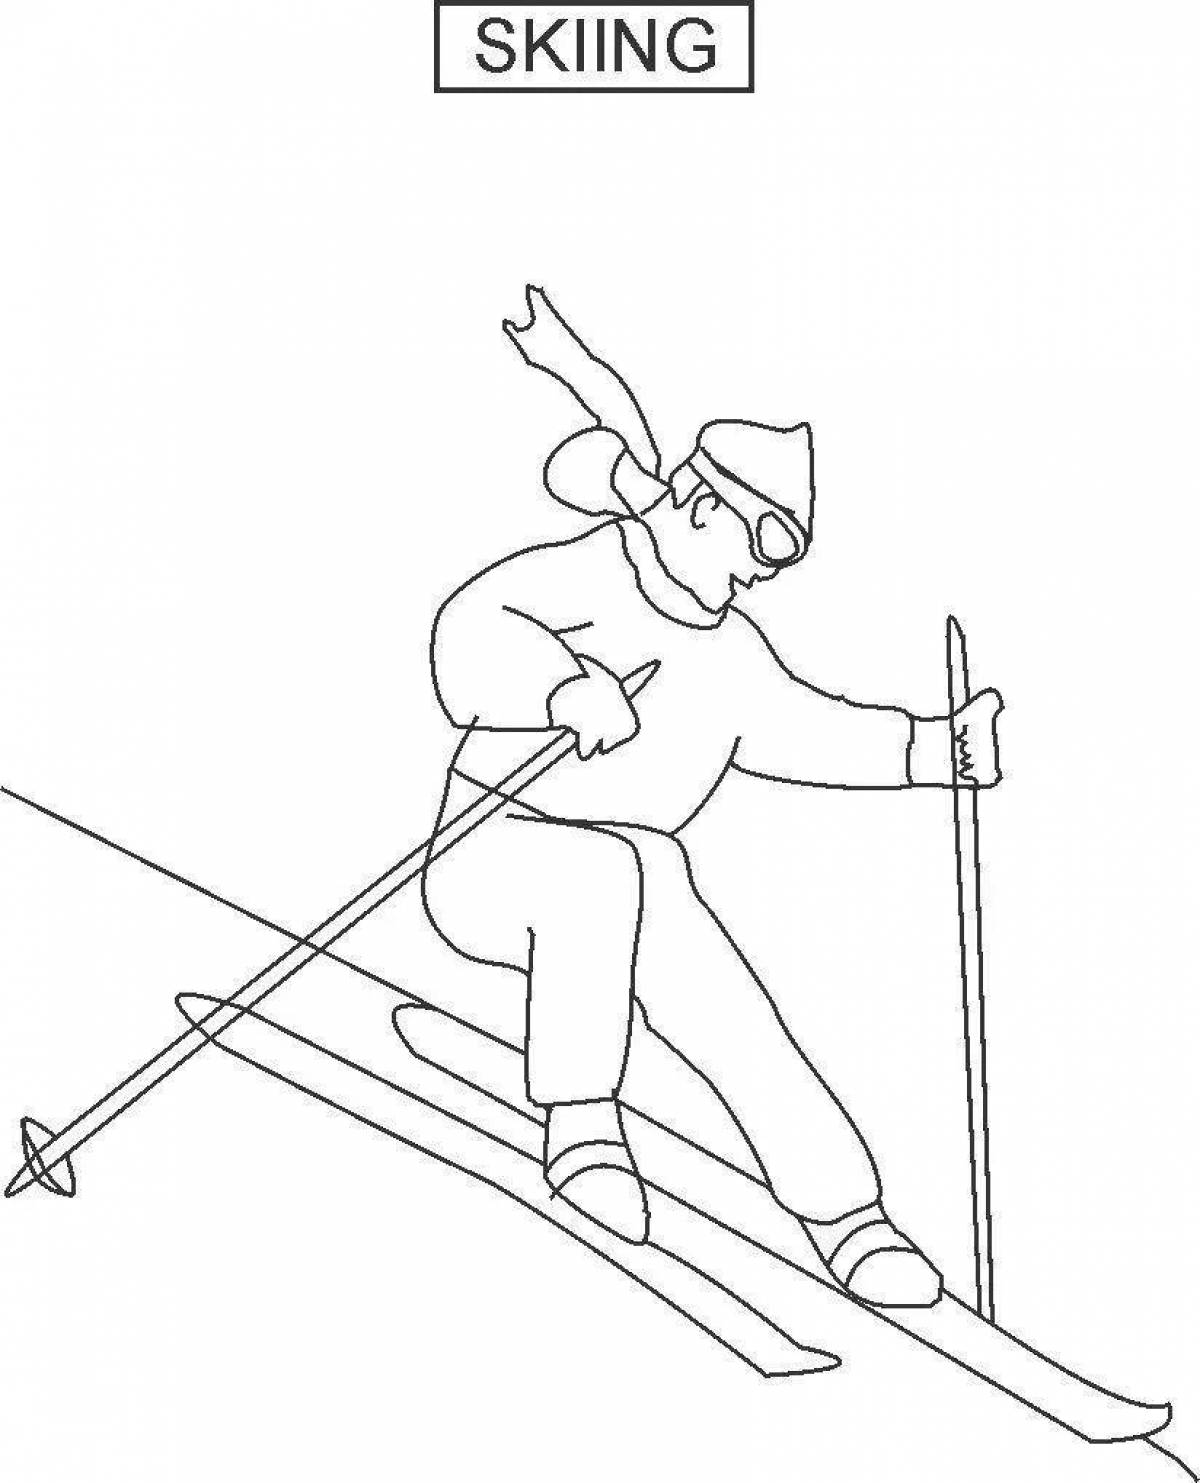 Coloring book magical skier